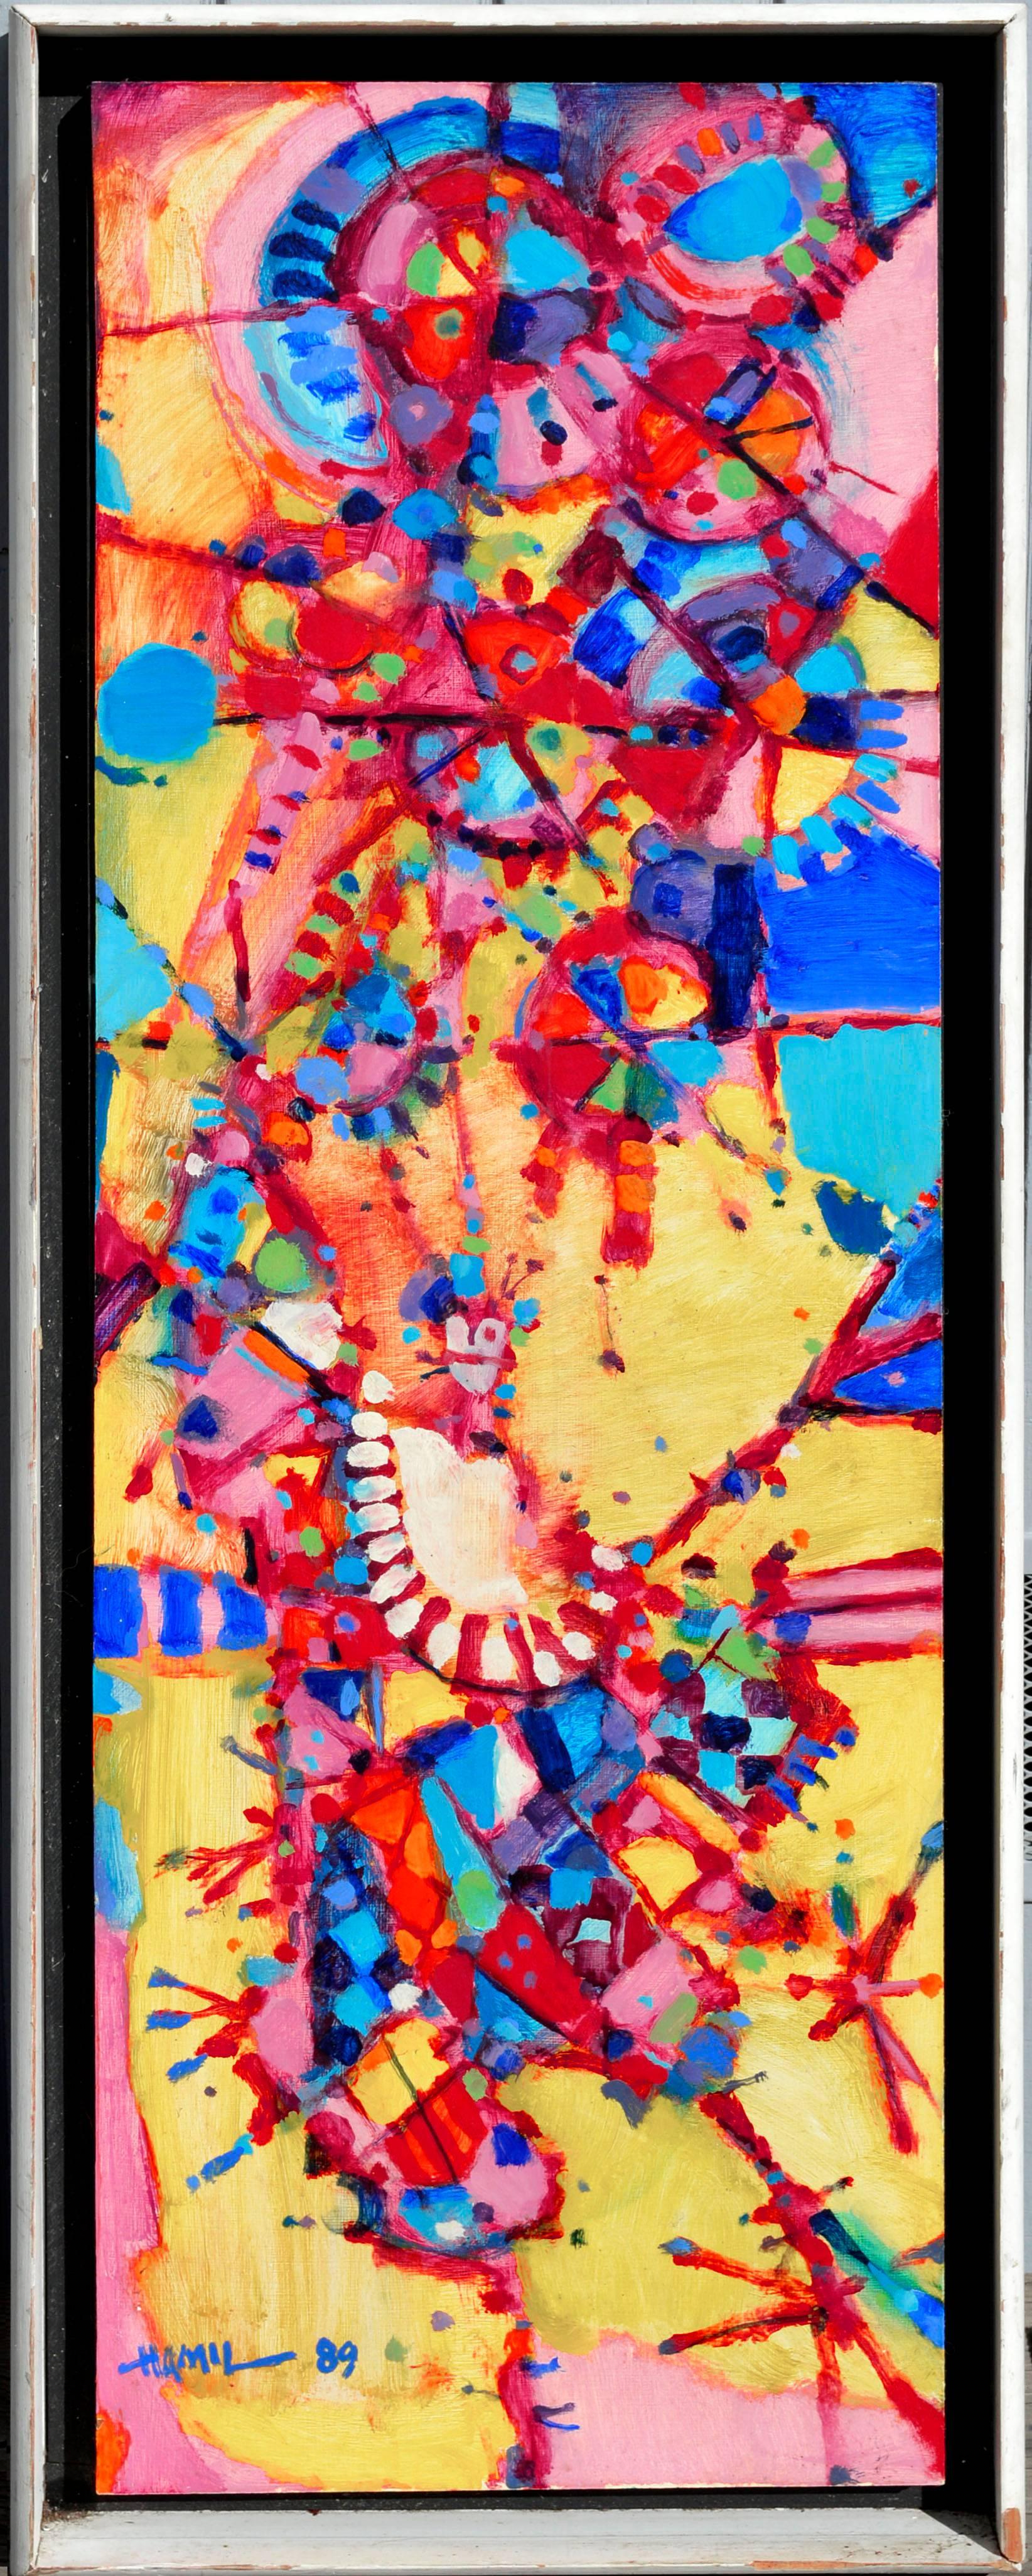 Tom Hamil Abstract Painting - "The Juggler" - Geometric Figurative Abstract Expressionist 